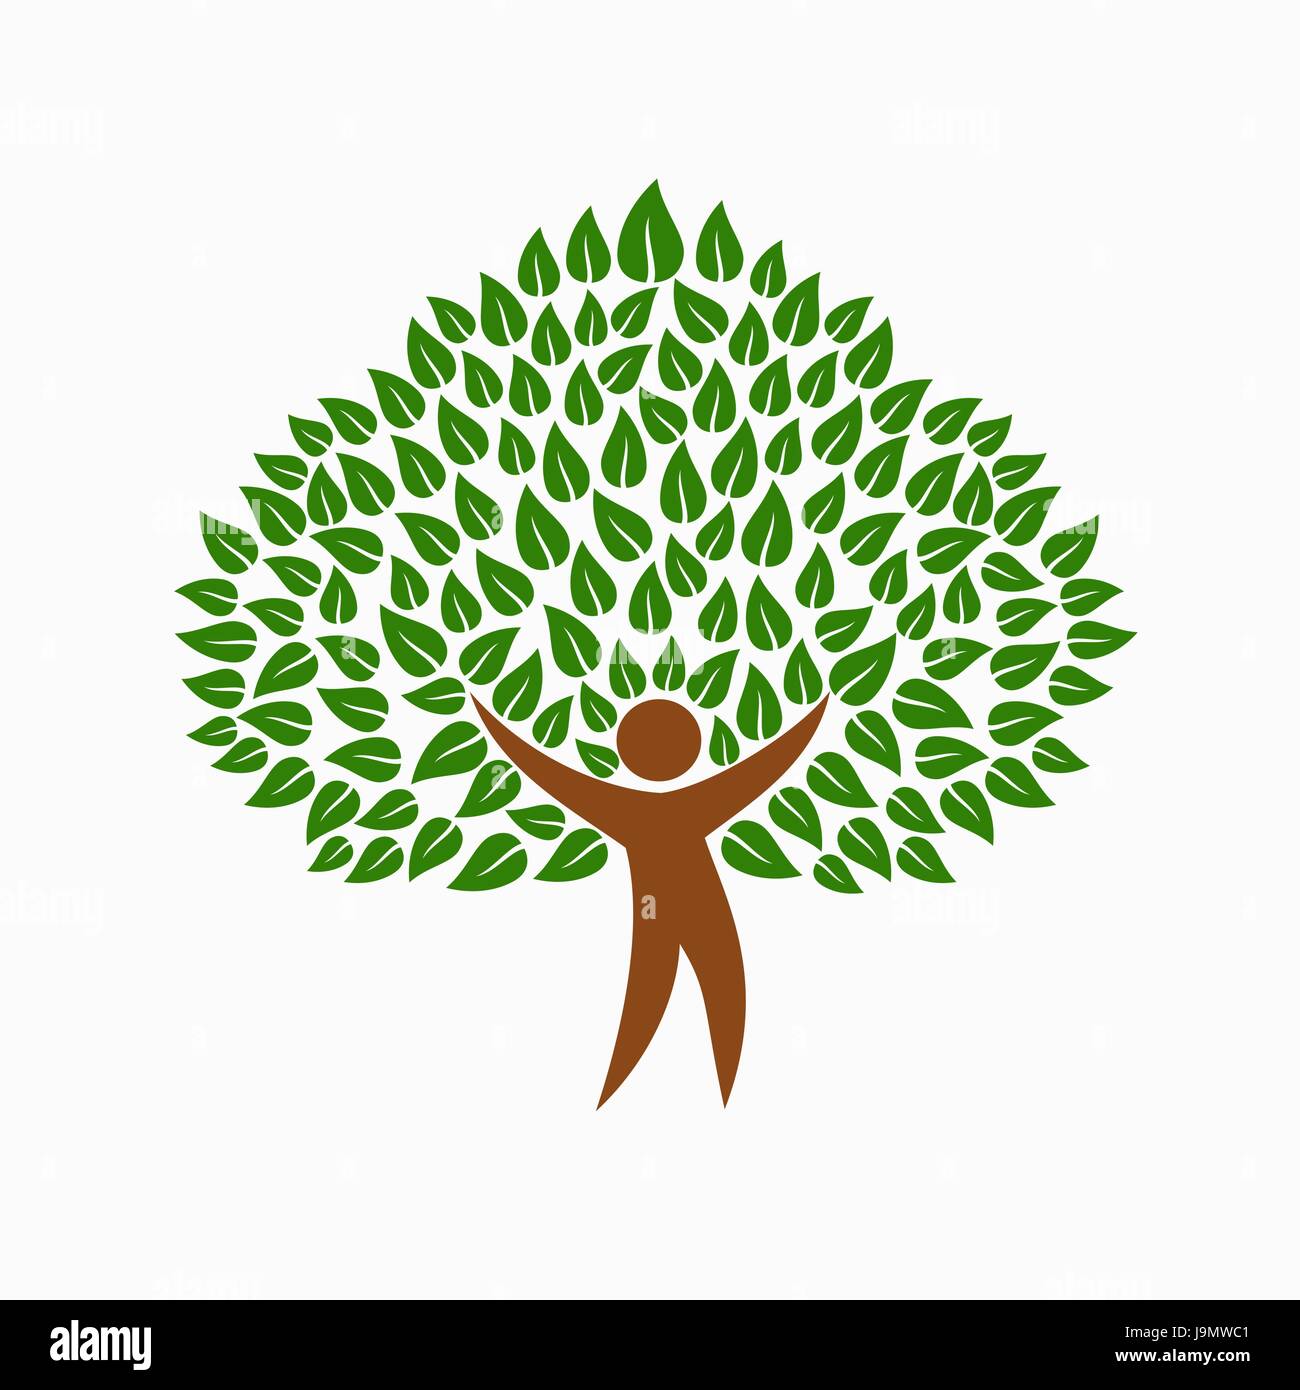 Green tree symbol with human silhouette. Concept illustration for environment help project or nature care. EPS10 vector. Stock Vector